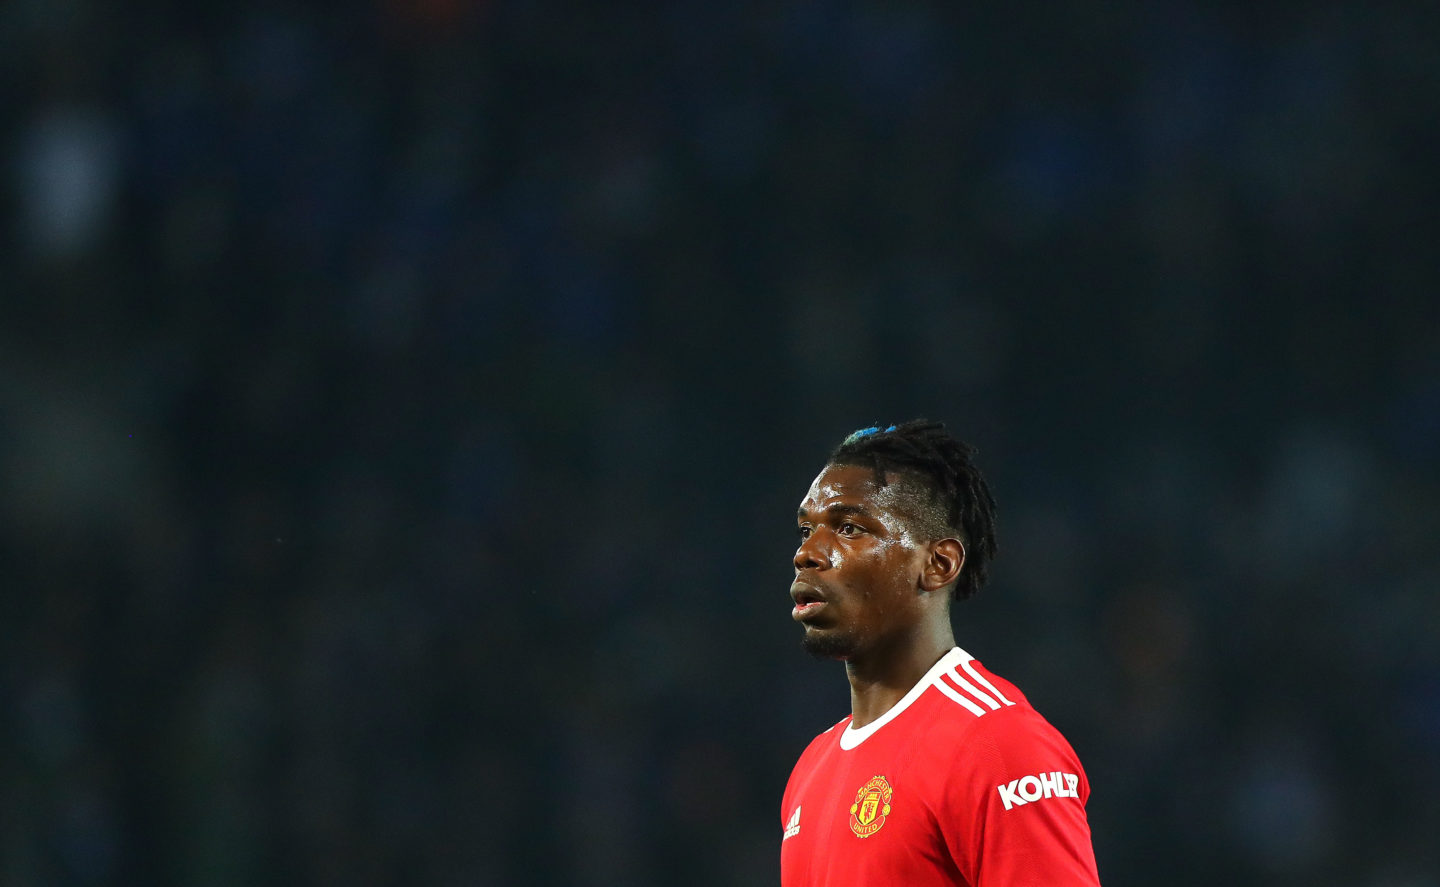 Paul Pogba dismisses reports of bumper Manchester United contract offer